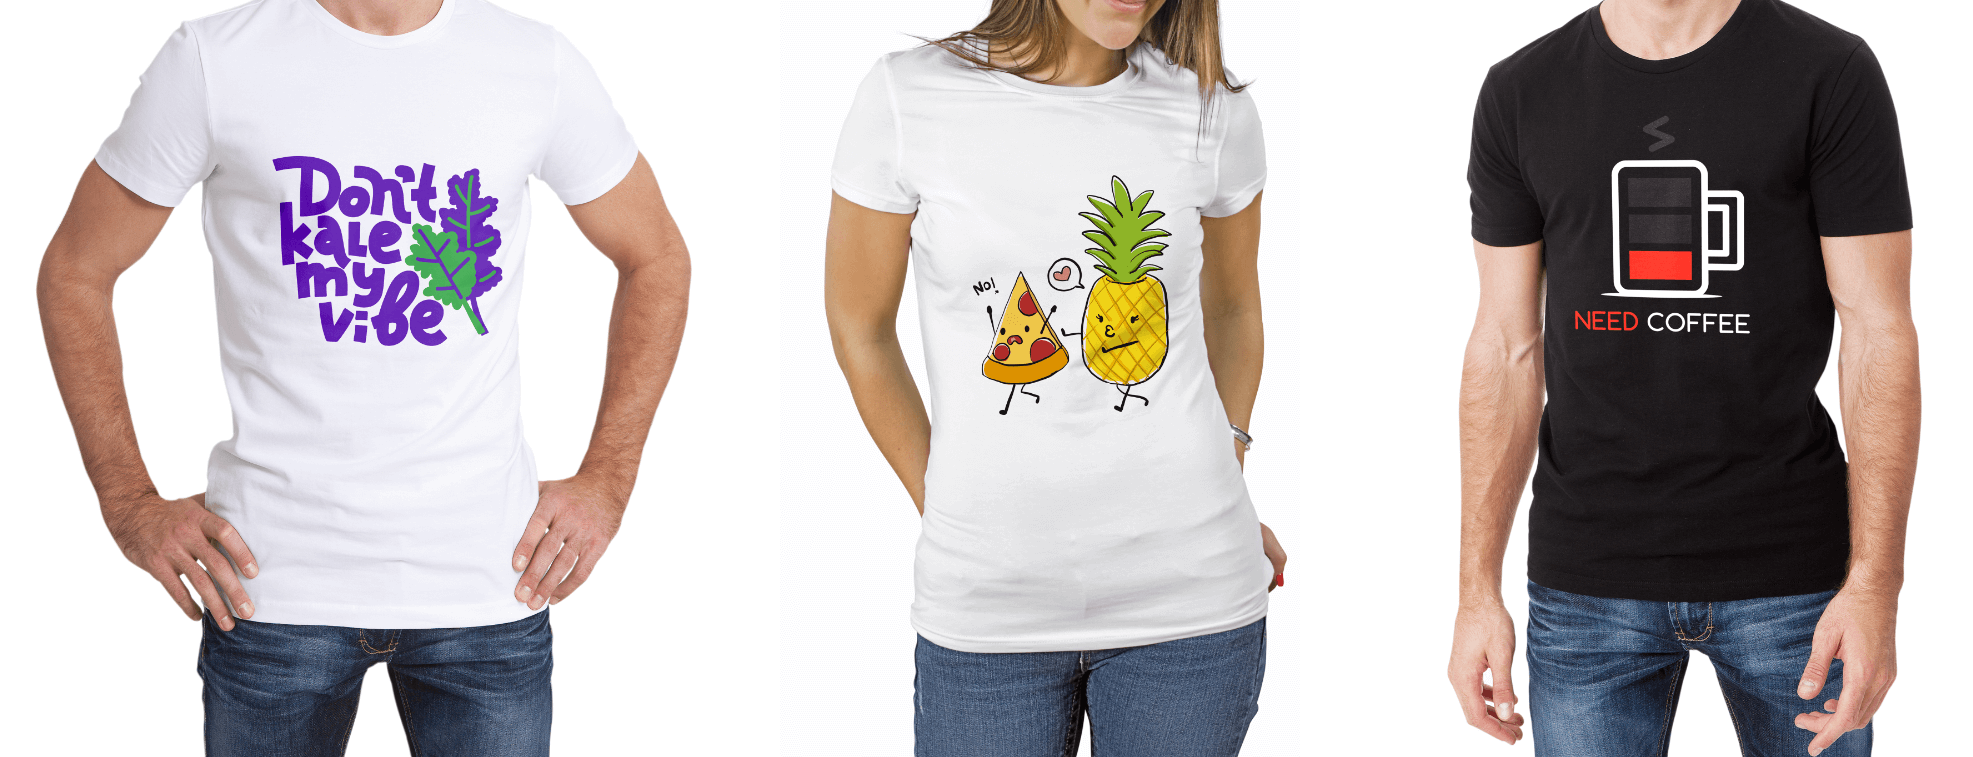 Different t-shirt designs with funny illustrations and images